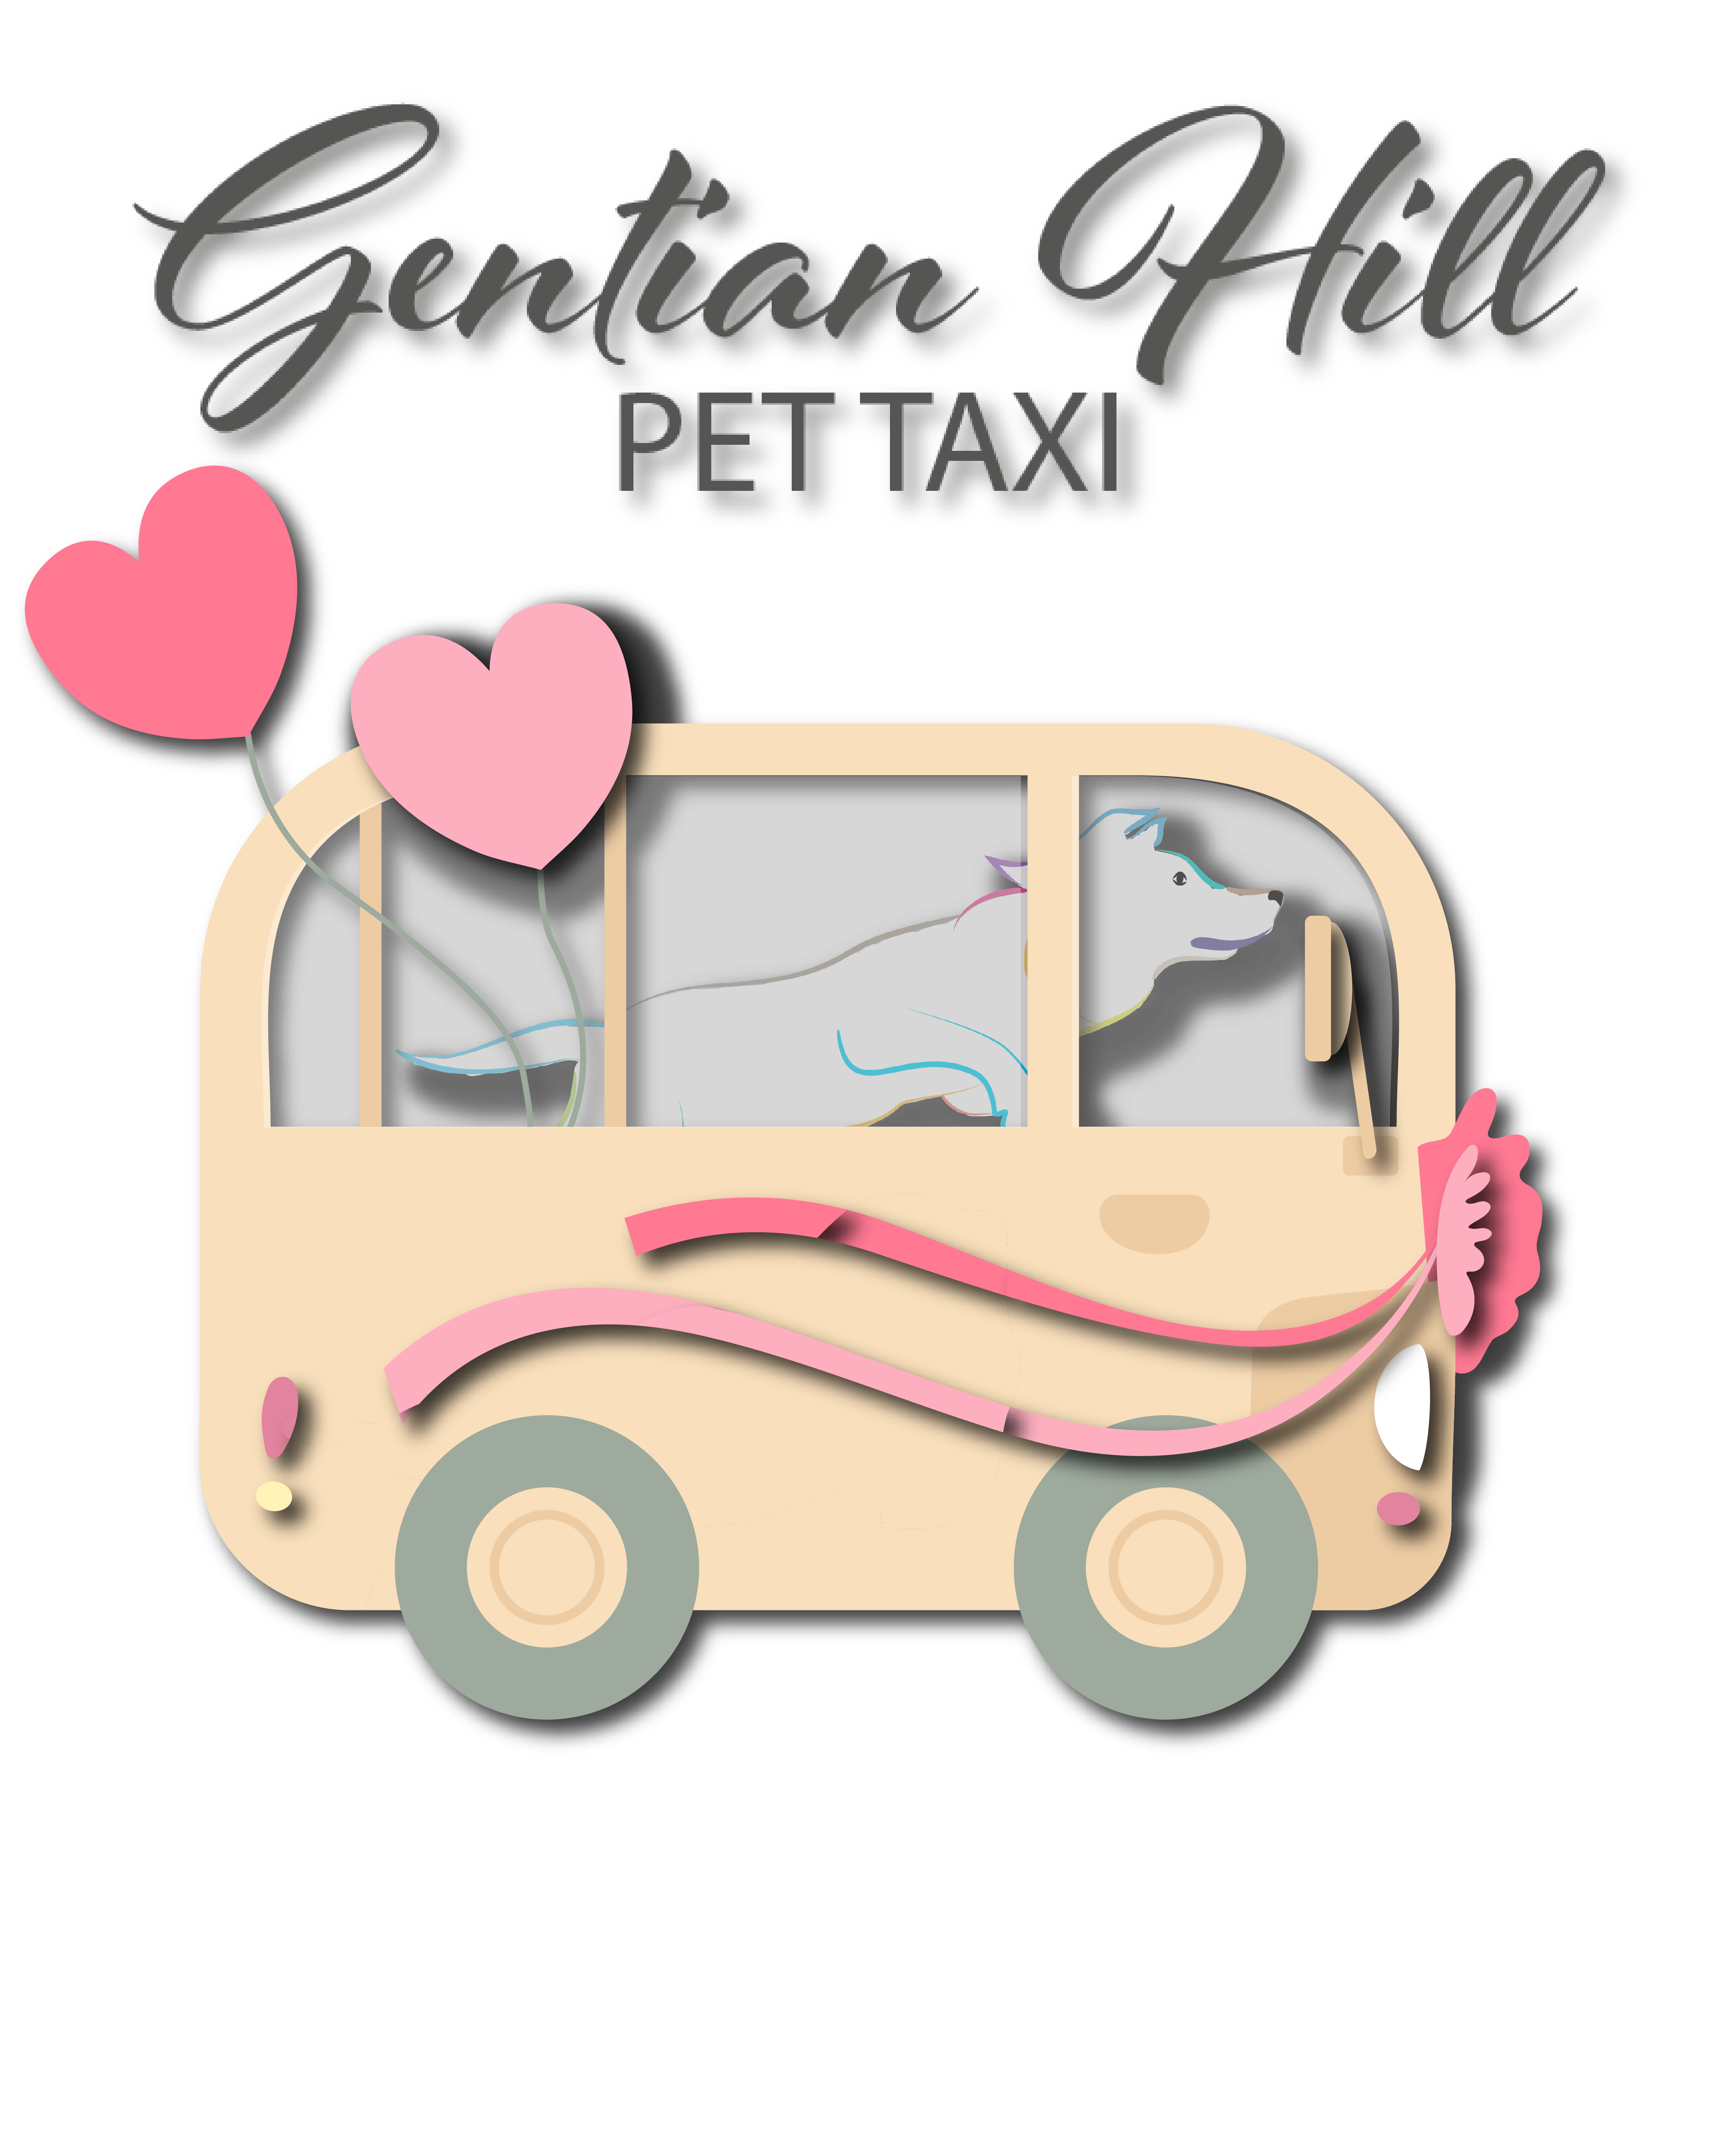 Pet taxi illustration with dog driving fun campervan with heart shaped balloons